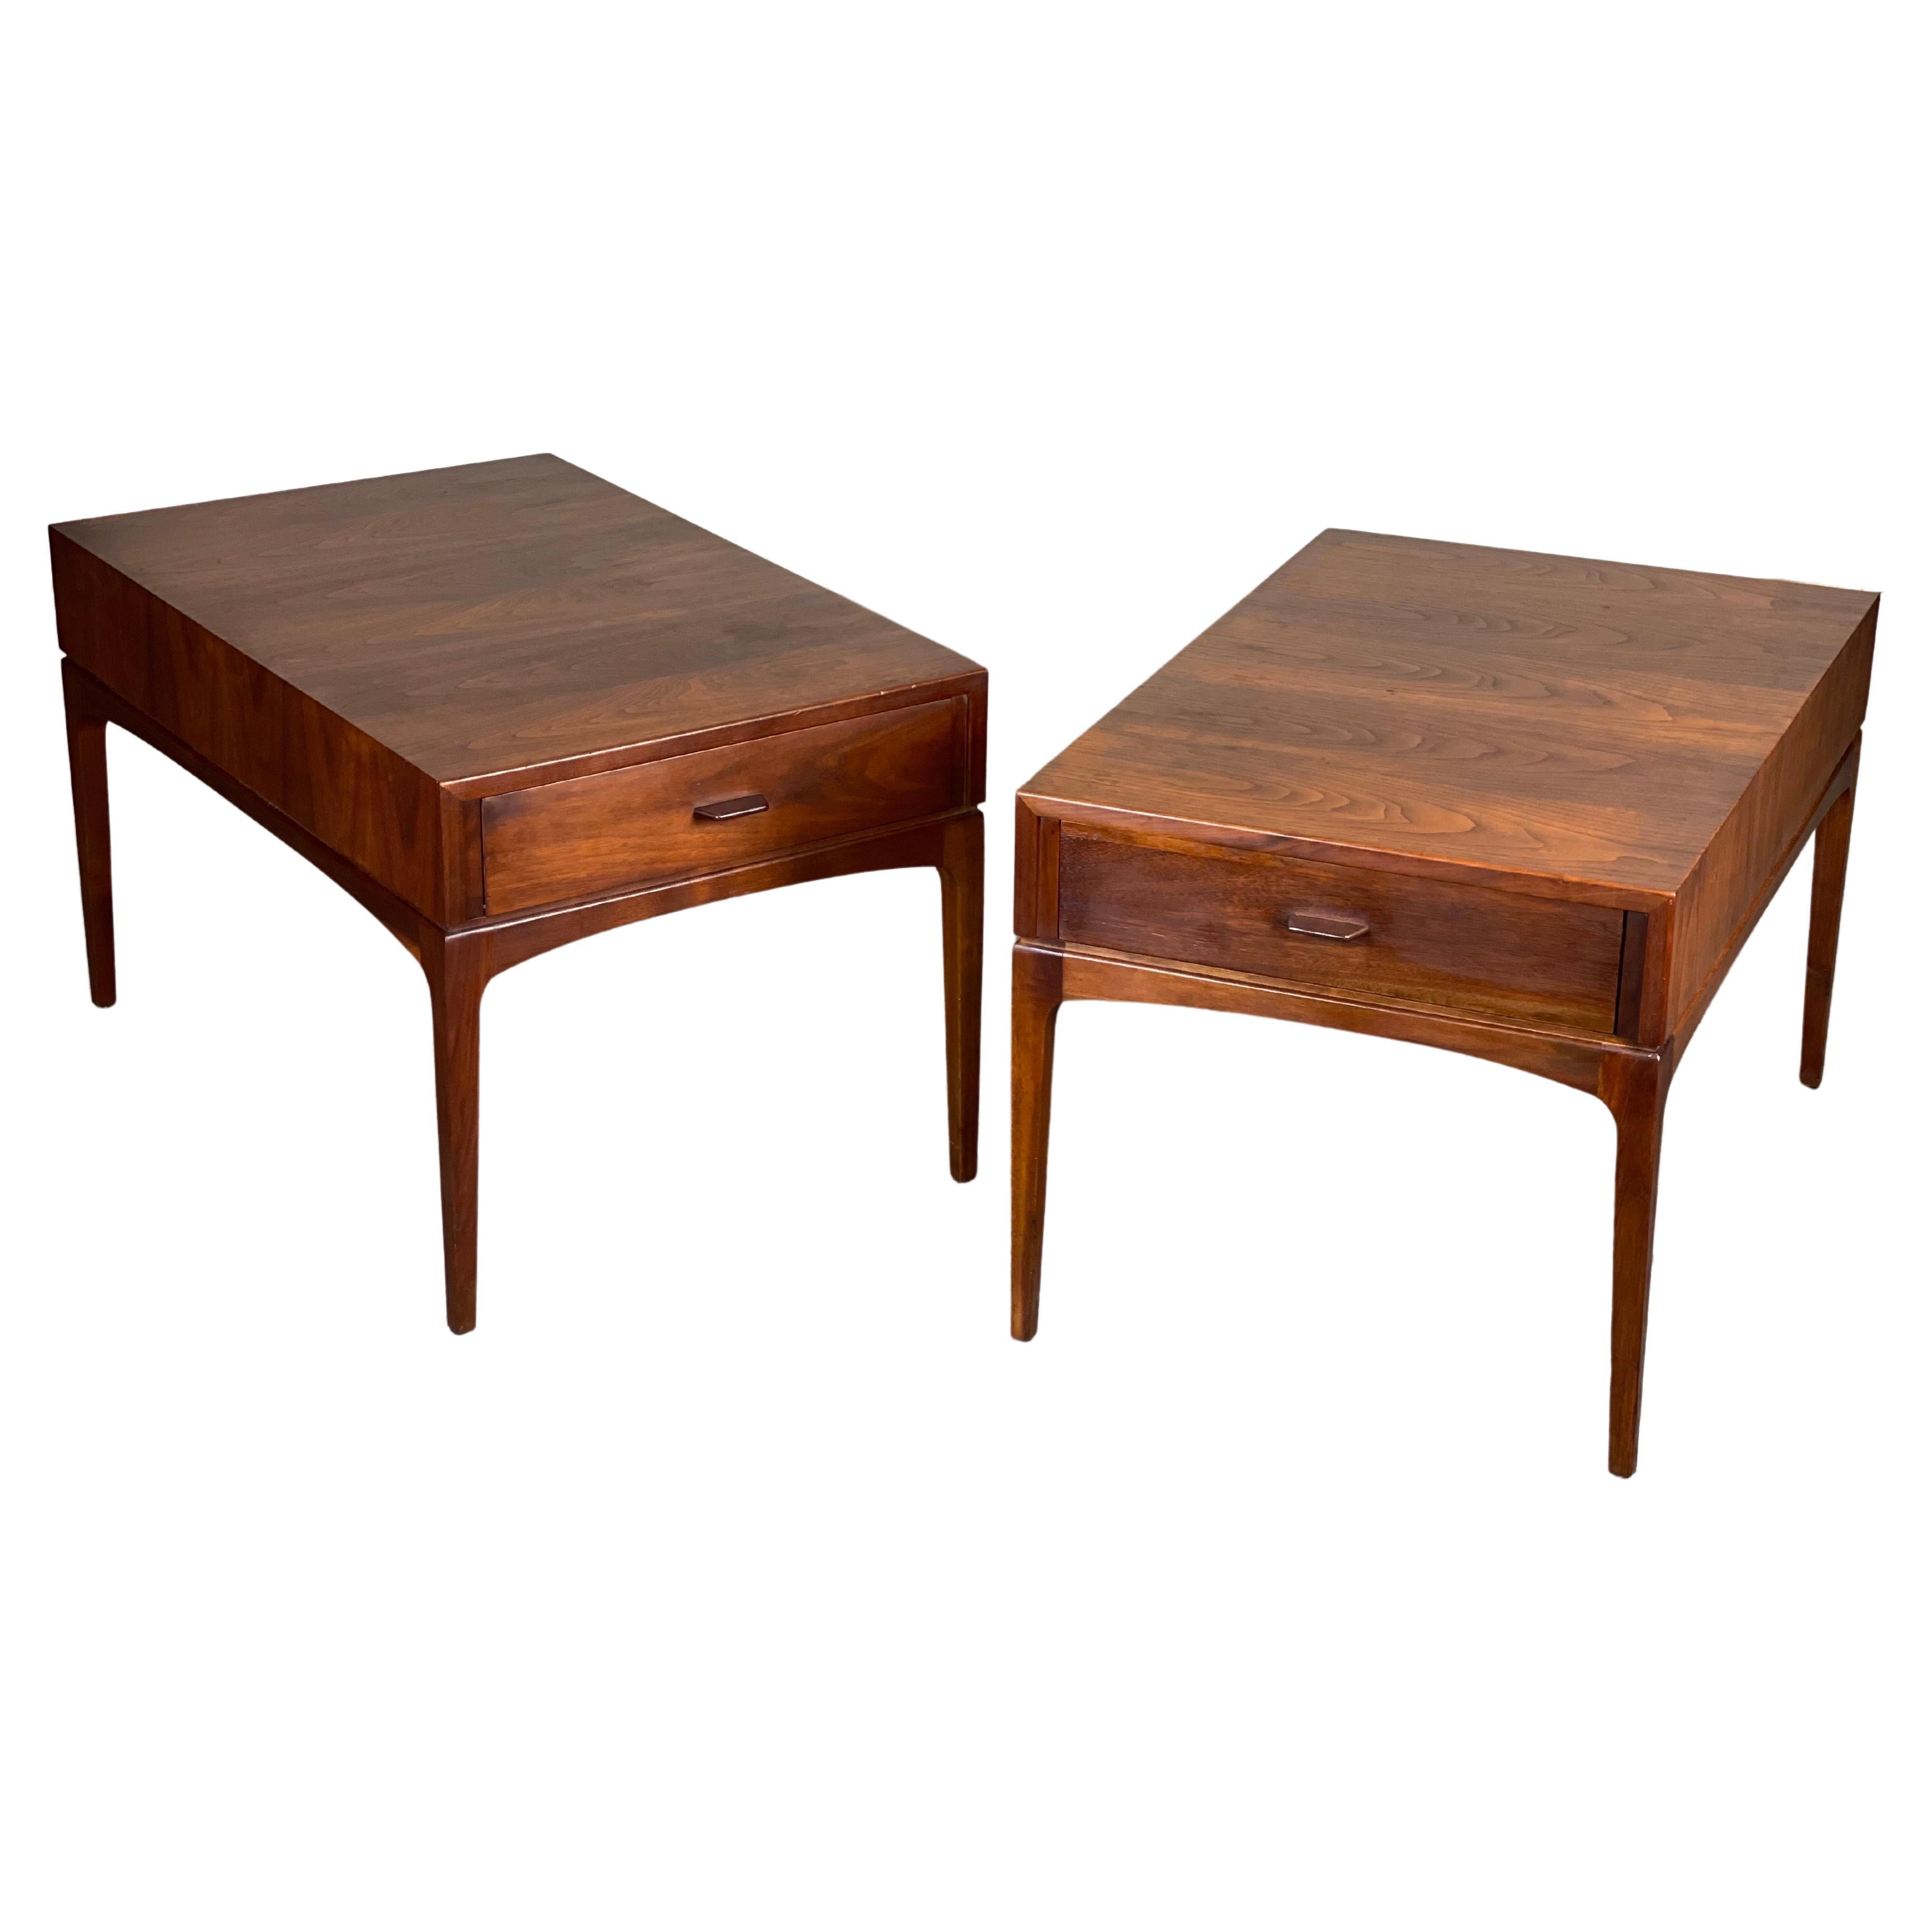 Rare Set of Mid-Century Modern Nightstands by Ace-Hi in Solid Walnut